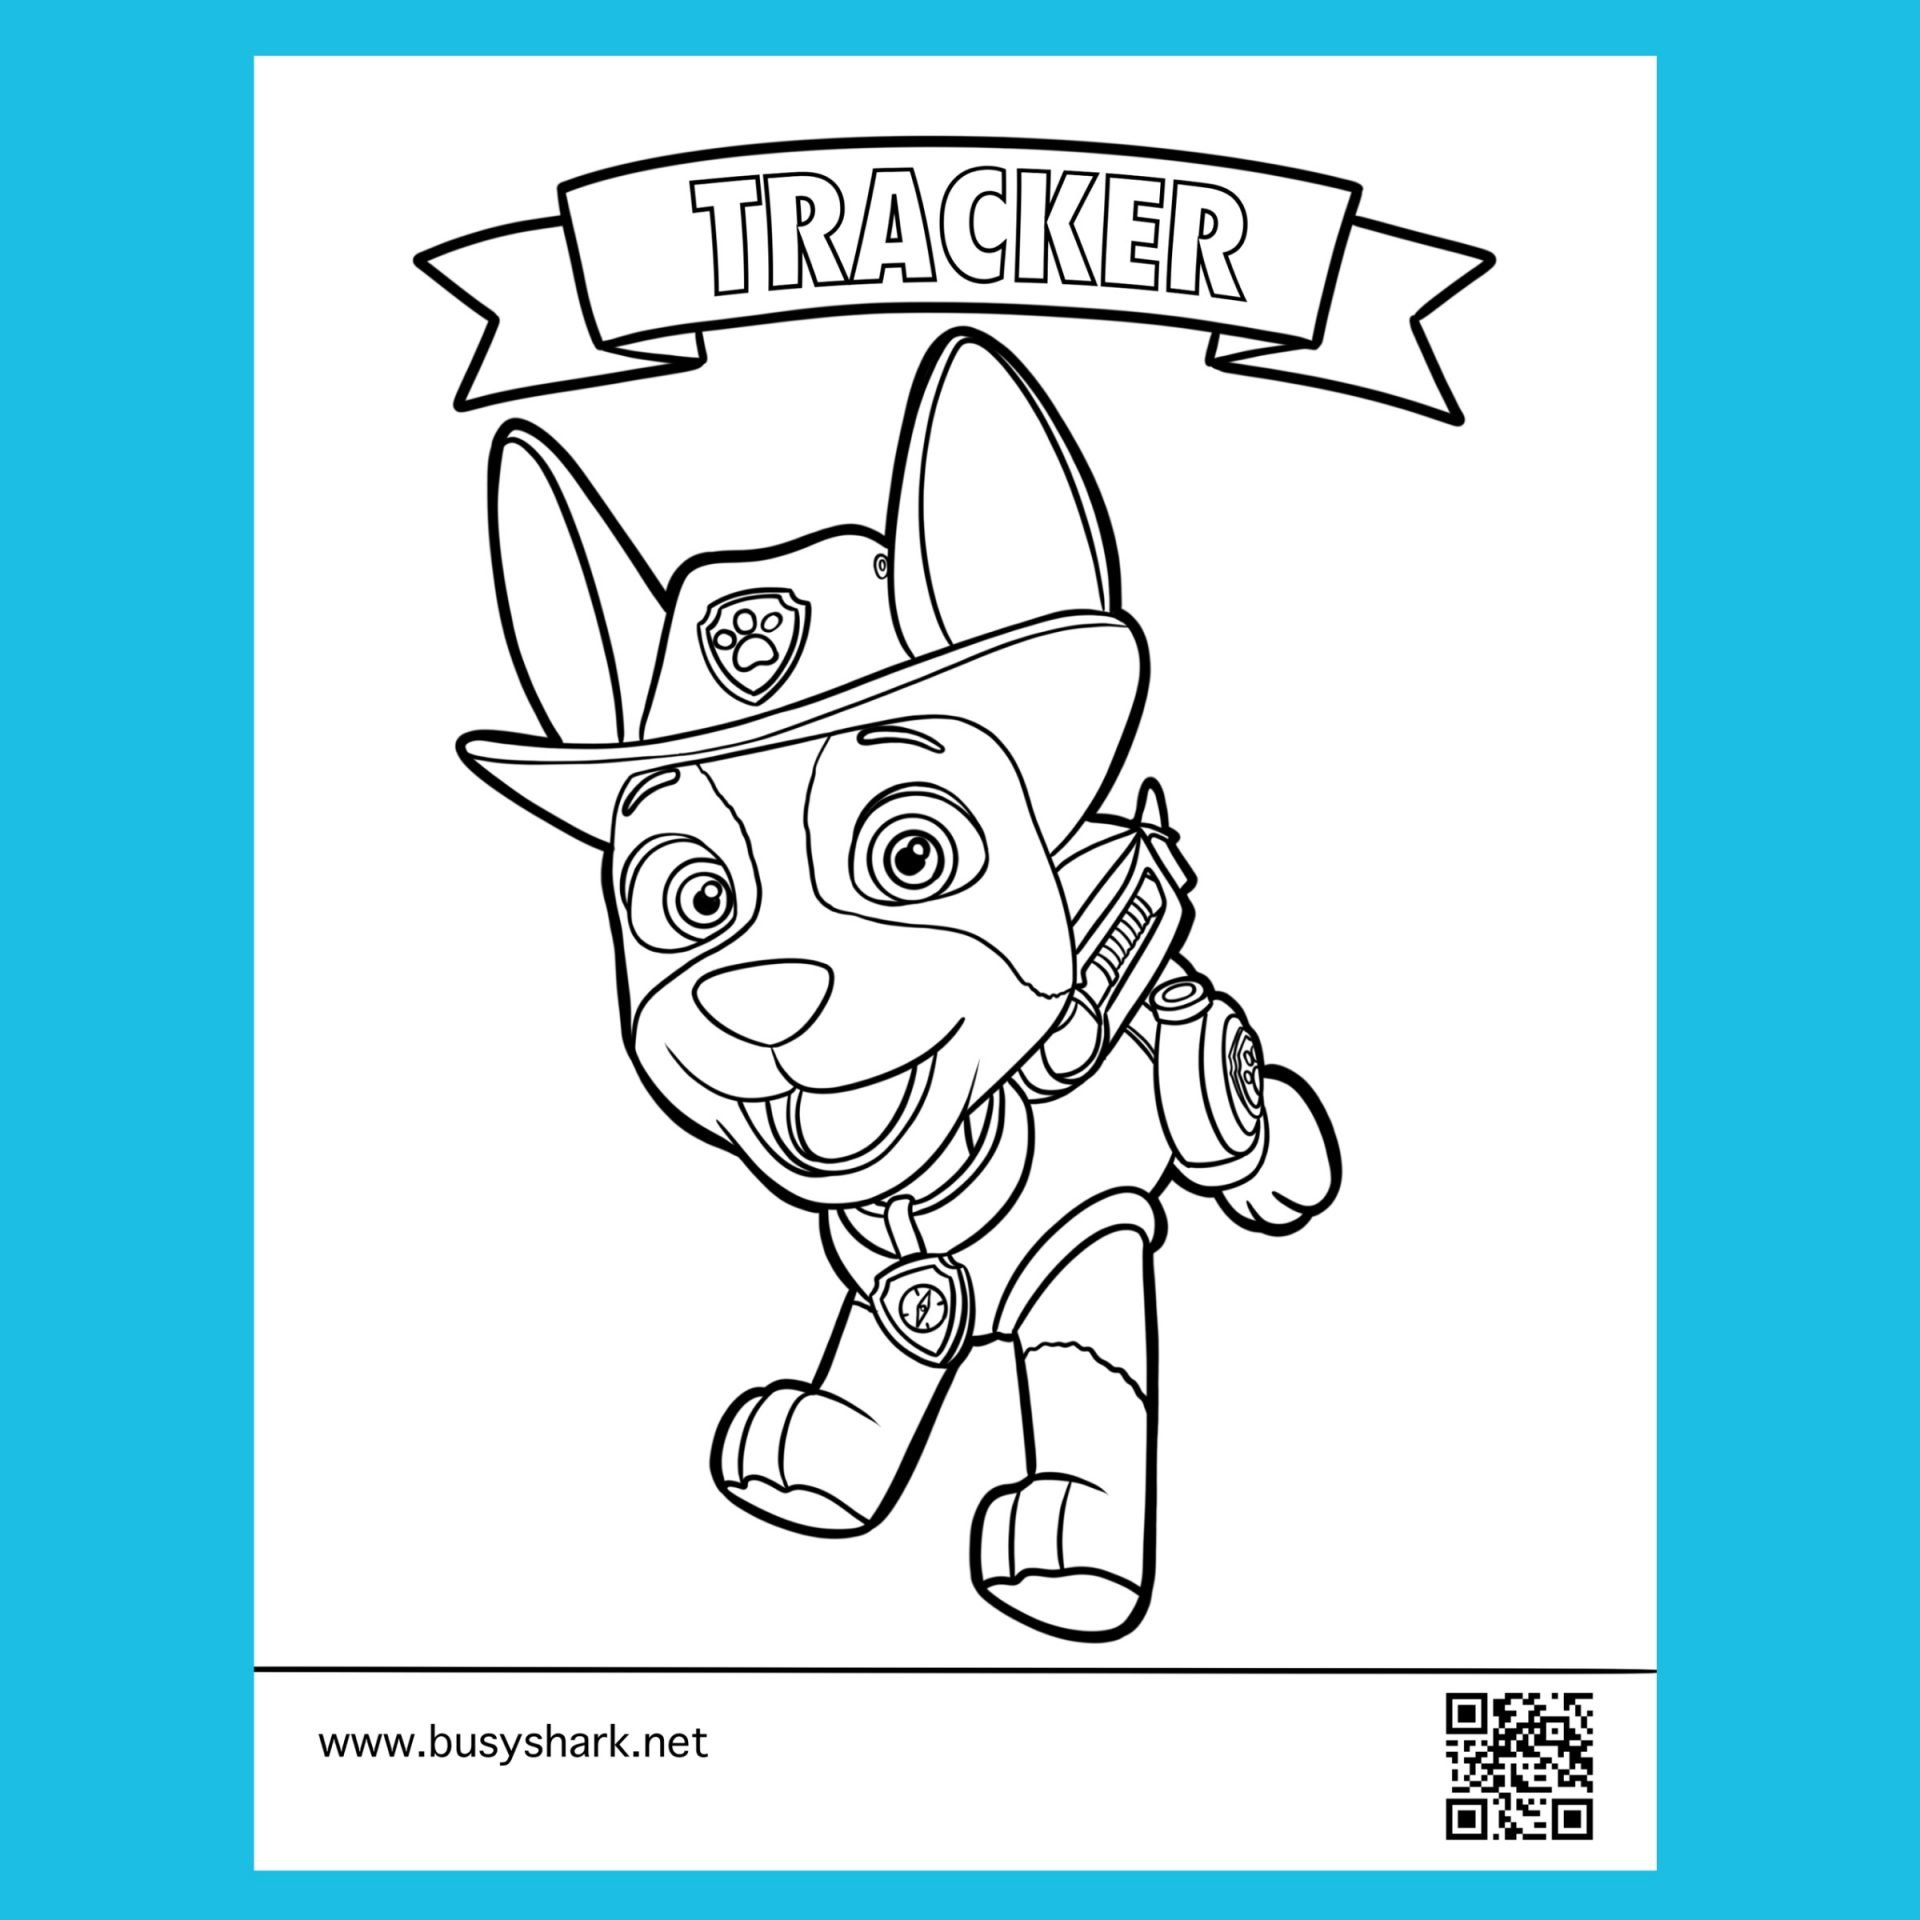 Paw patrol tracker free coloring page